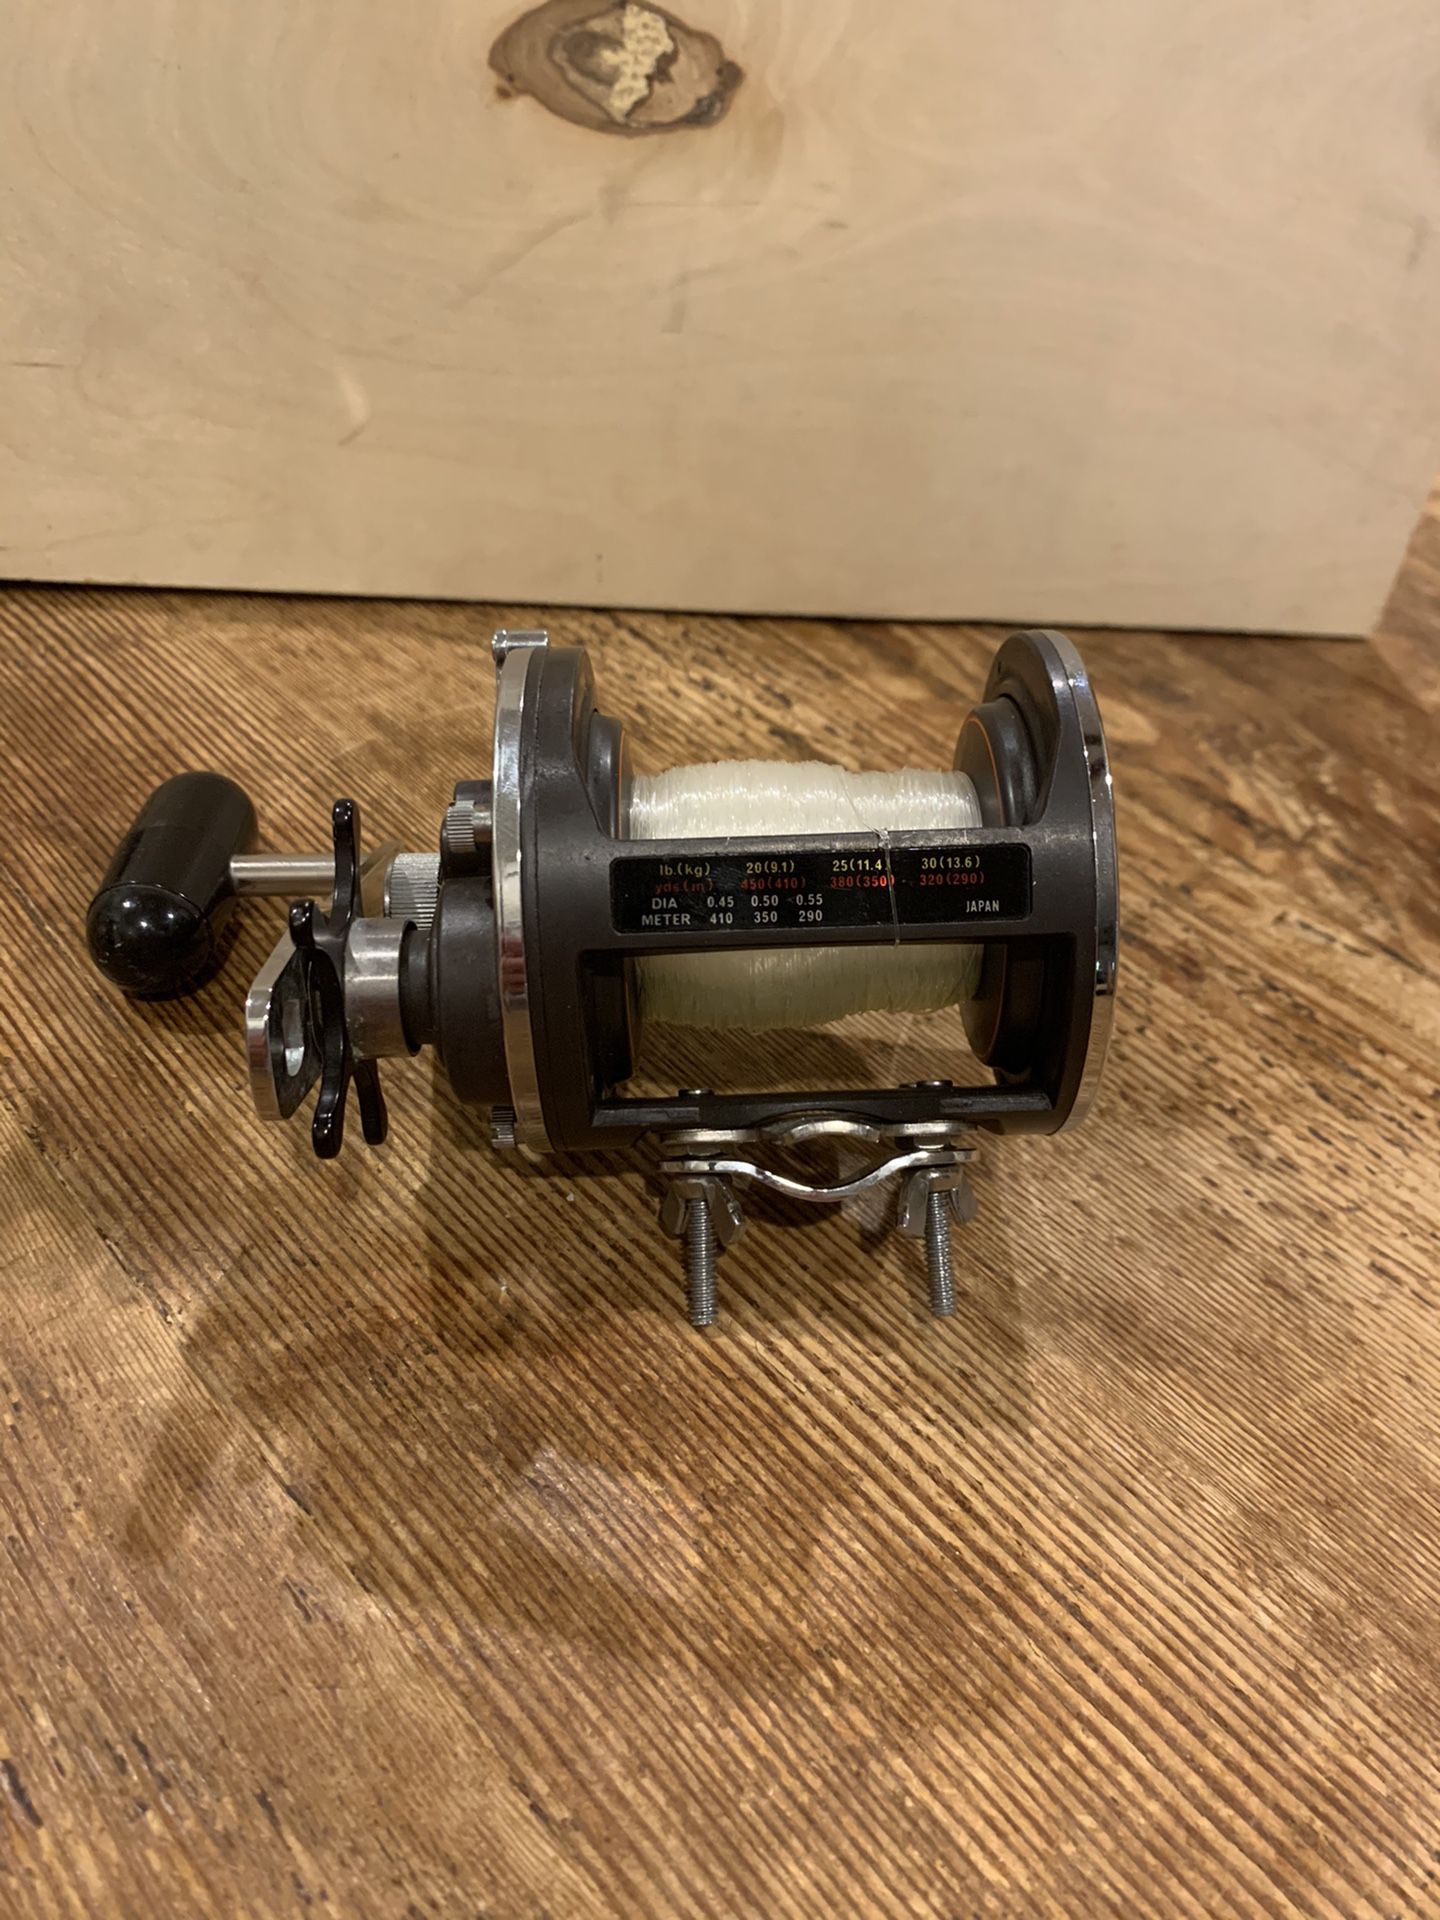 Daiwa Sealine H Fishing Reel For Sale In Chino Hills Ca Offerup